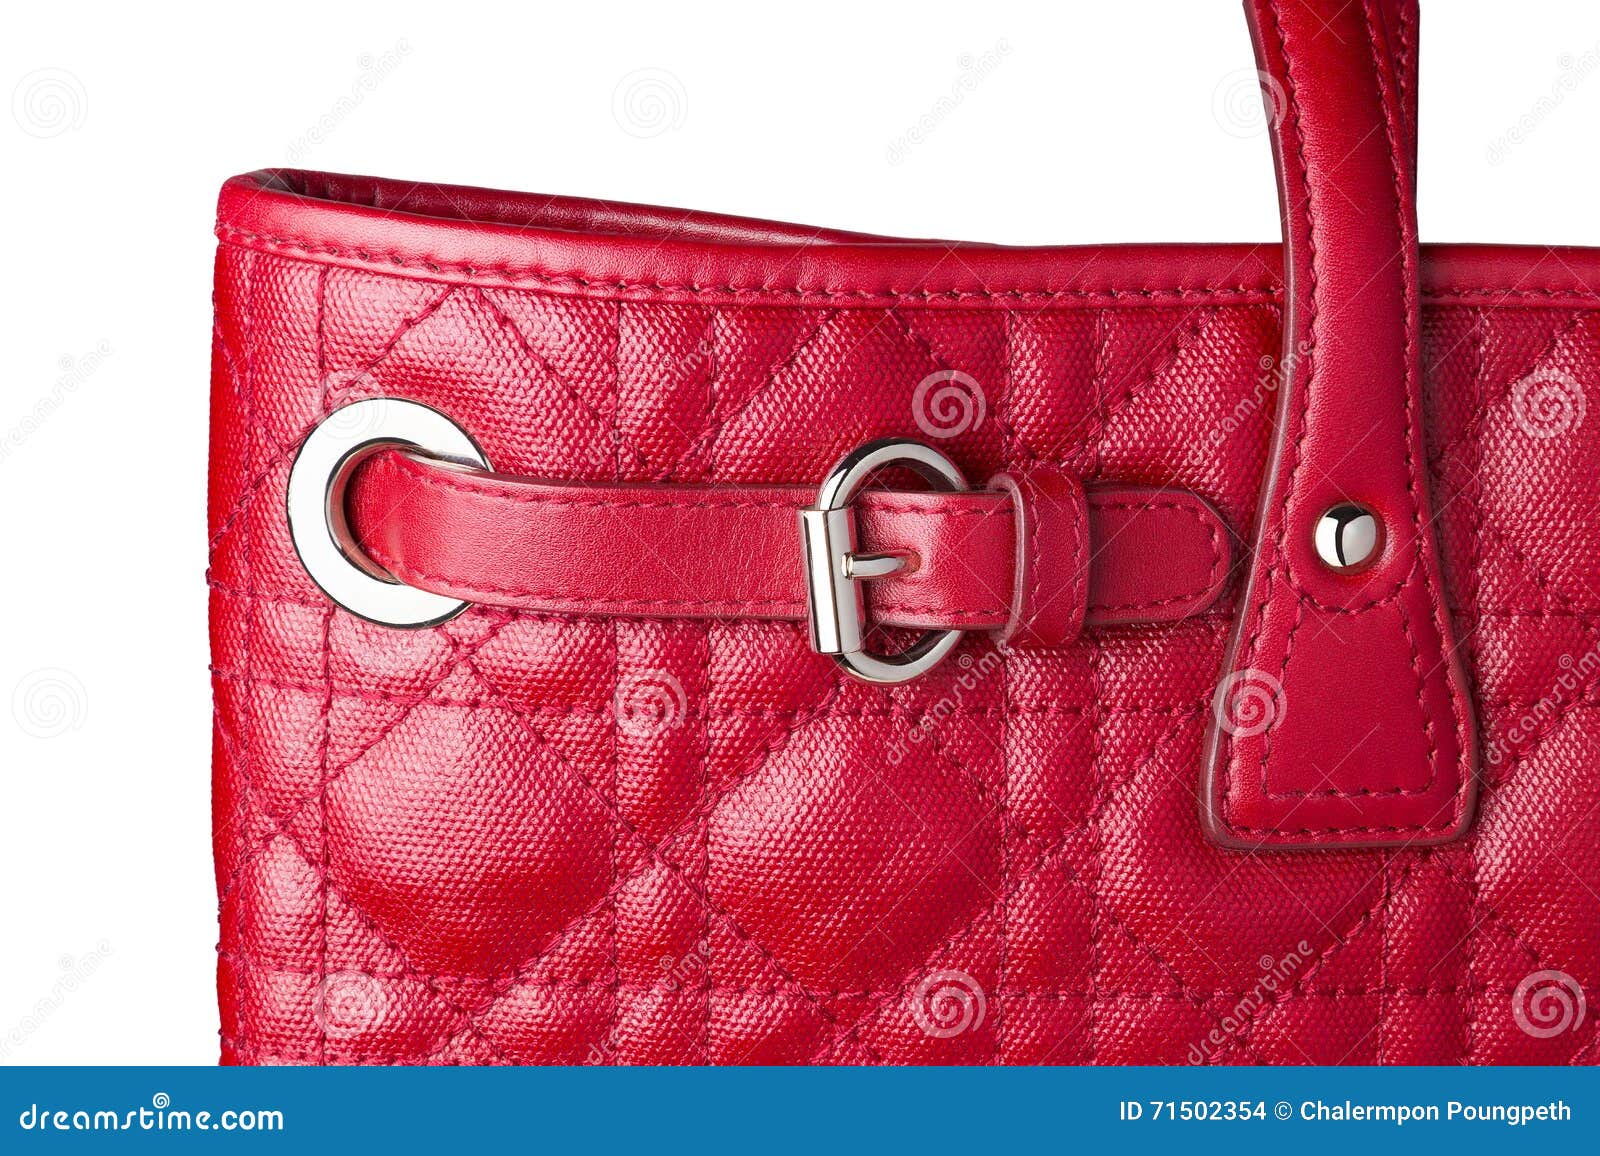 Red Leather Bag Buckles | Confederated Tribes of the Umatilla Indian Reservation